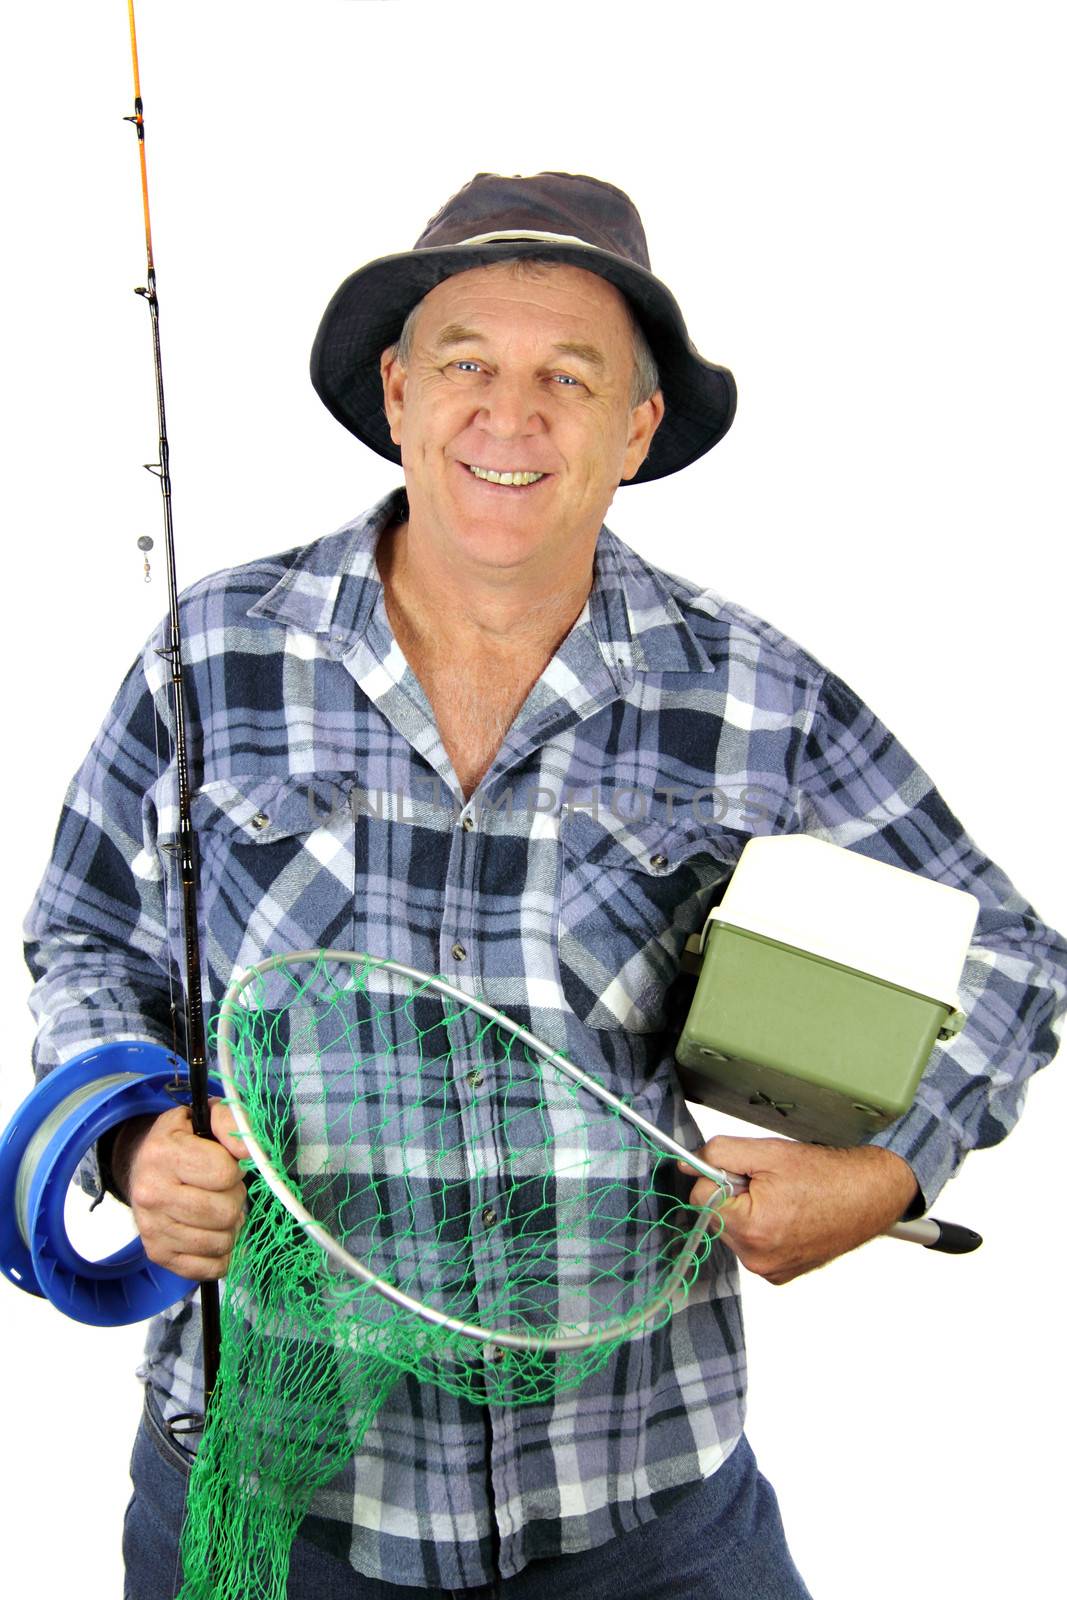 Middle aged fisherman carrying all the gear for a day's fishing.